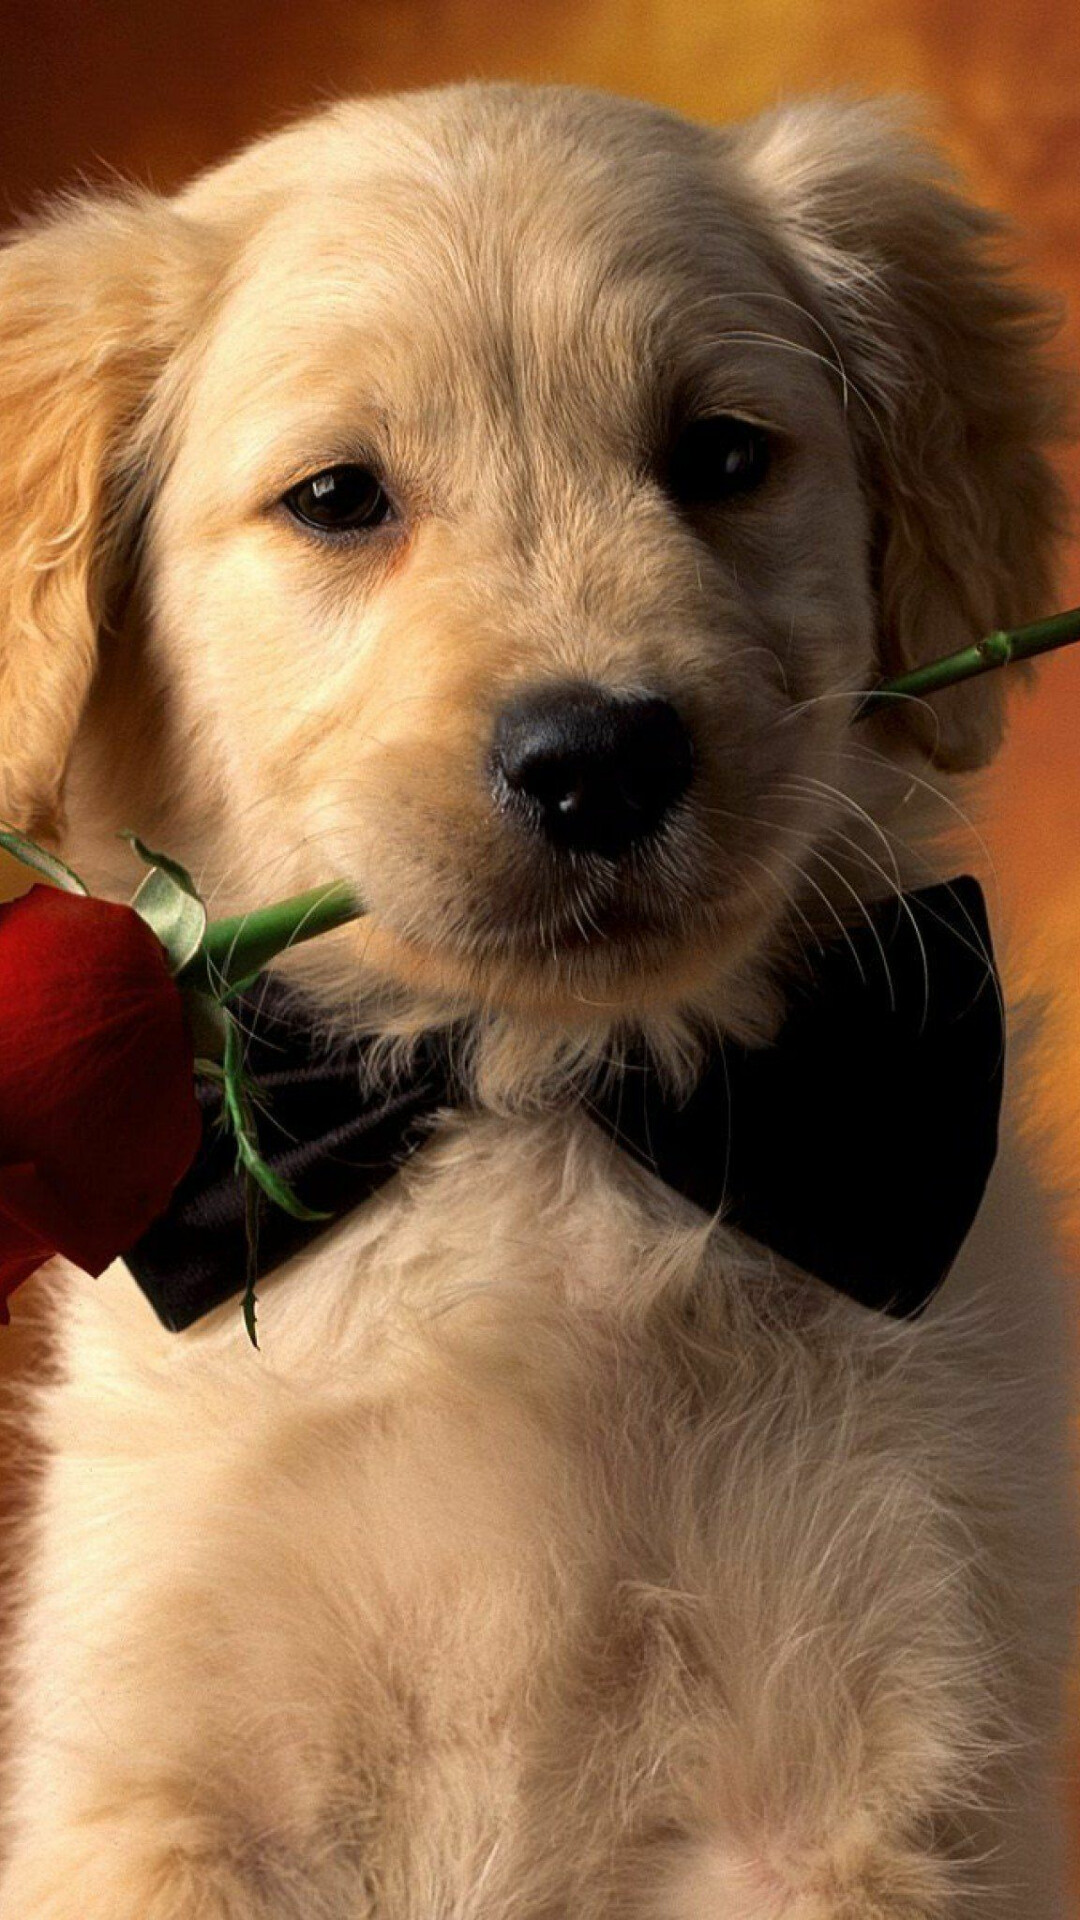 Dog: Often called "man's best friend" because they fit in with human life. 1080x1920 Full HD Background.